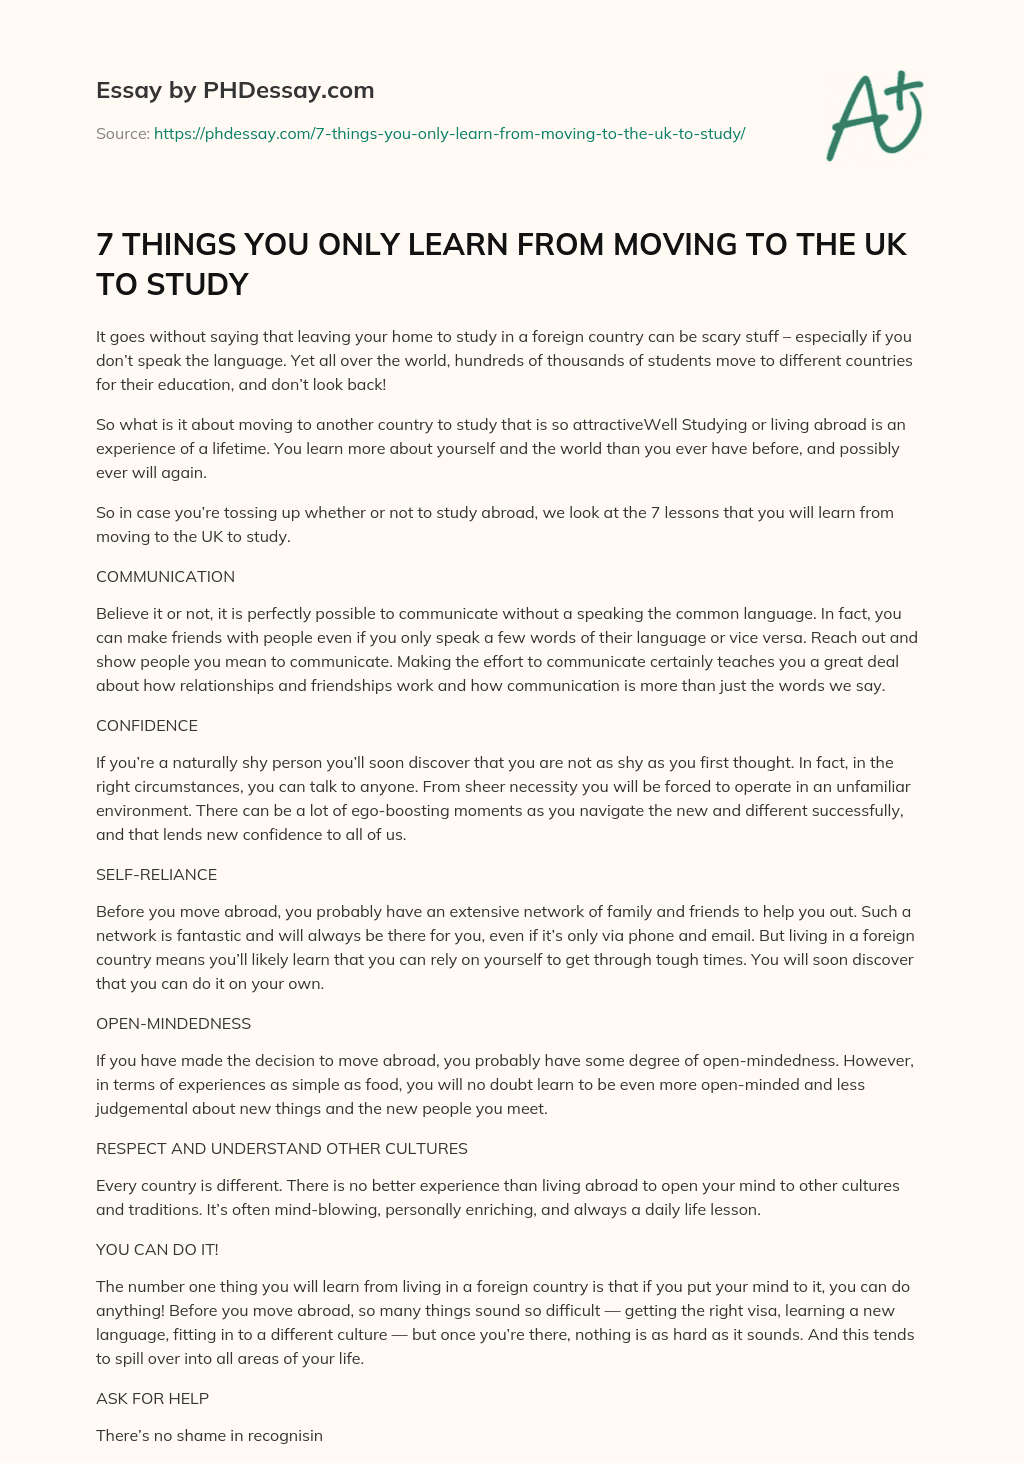 7 THINGS YOU ONLY LEARN FROM MOVING TO THE UK TO STUDY essay